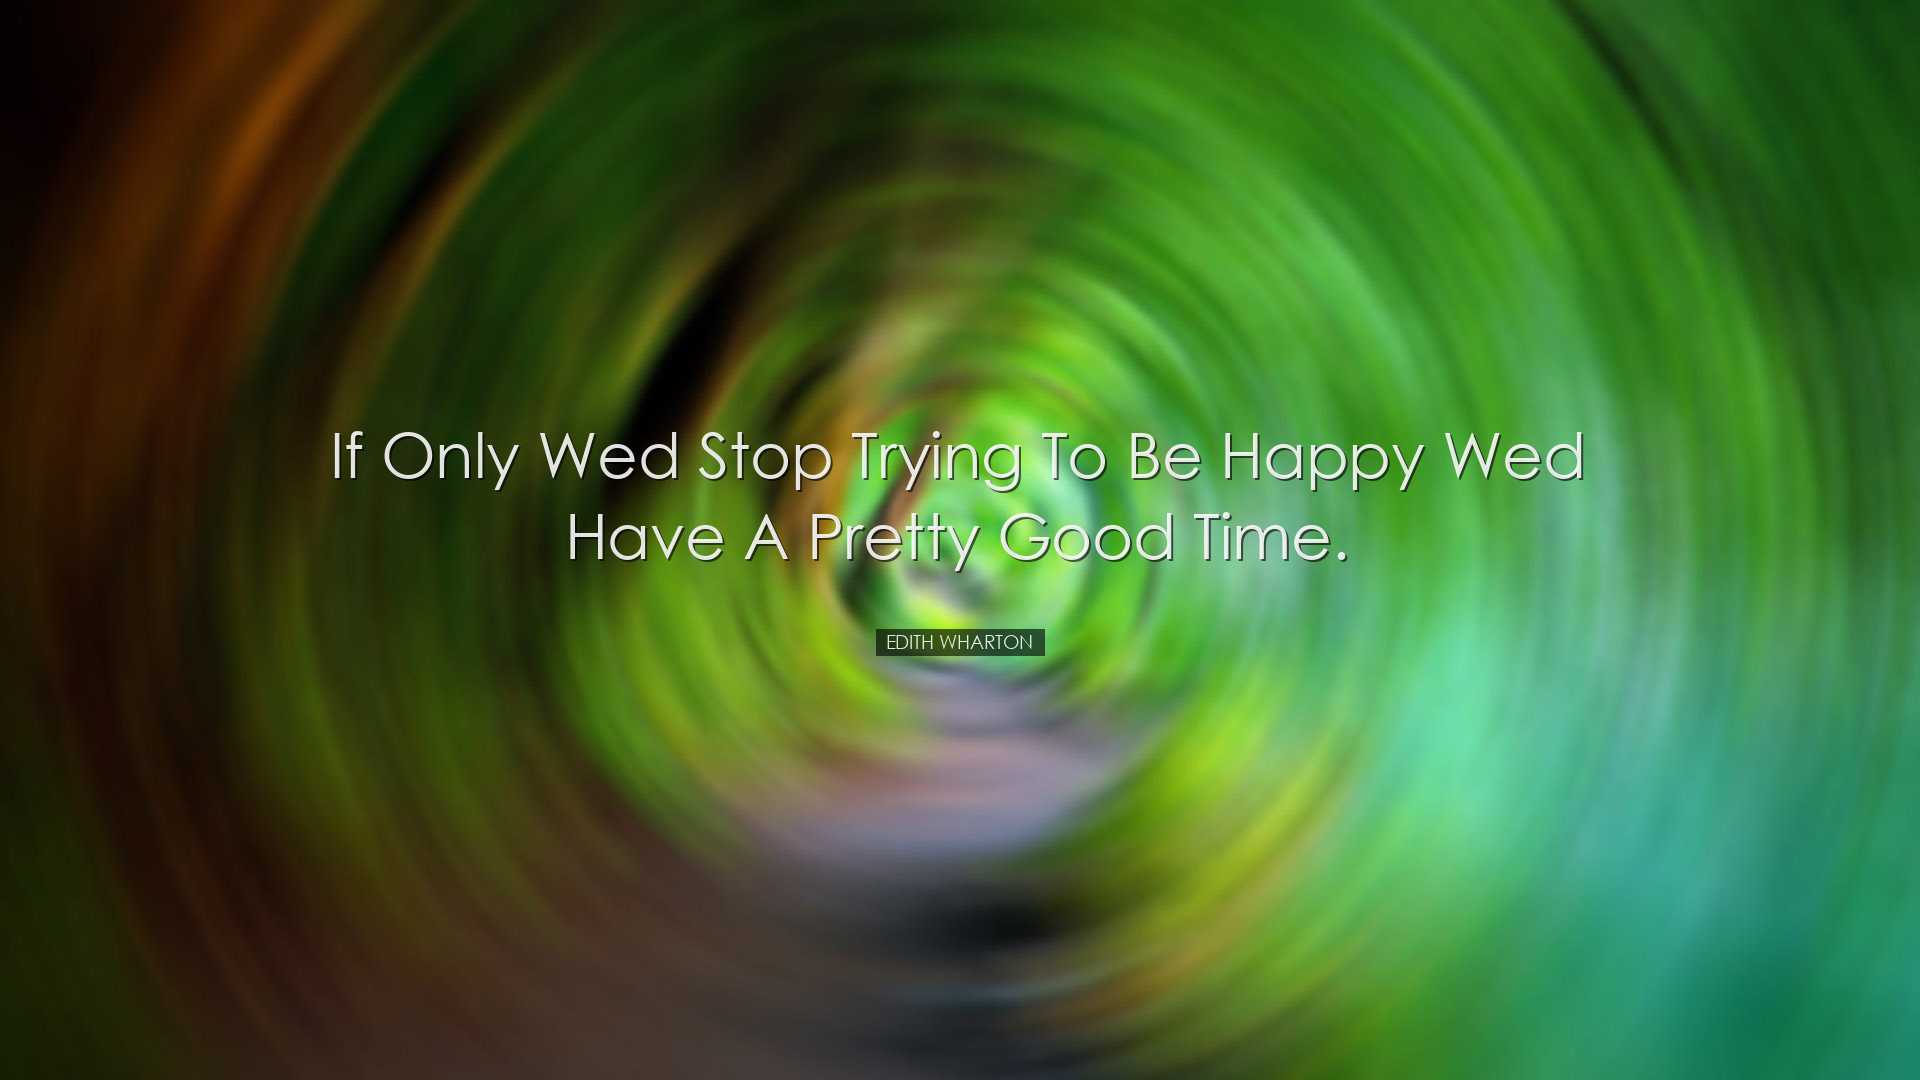 If only wed stop trying to be happy wed have a pretty good time. -